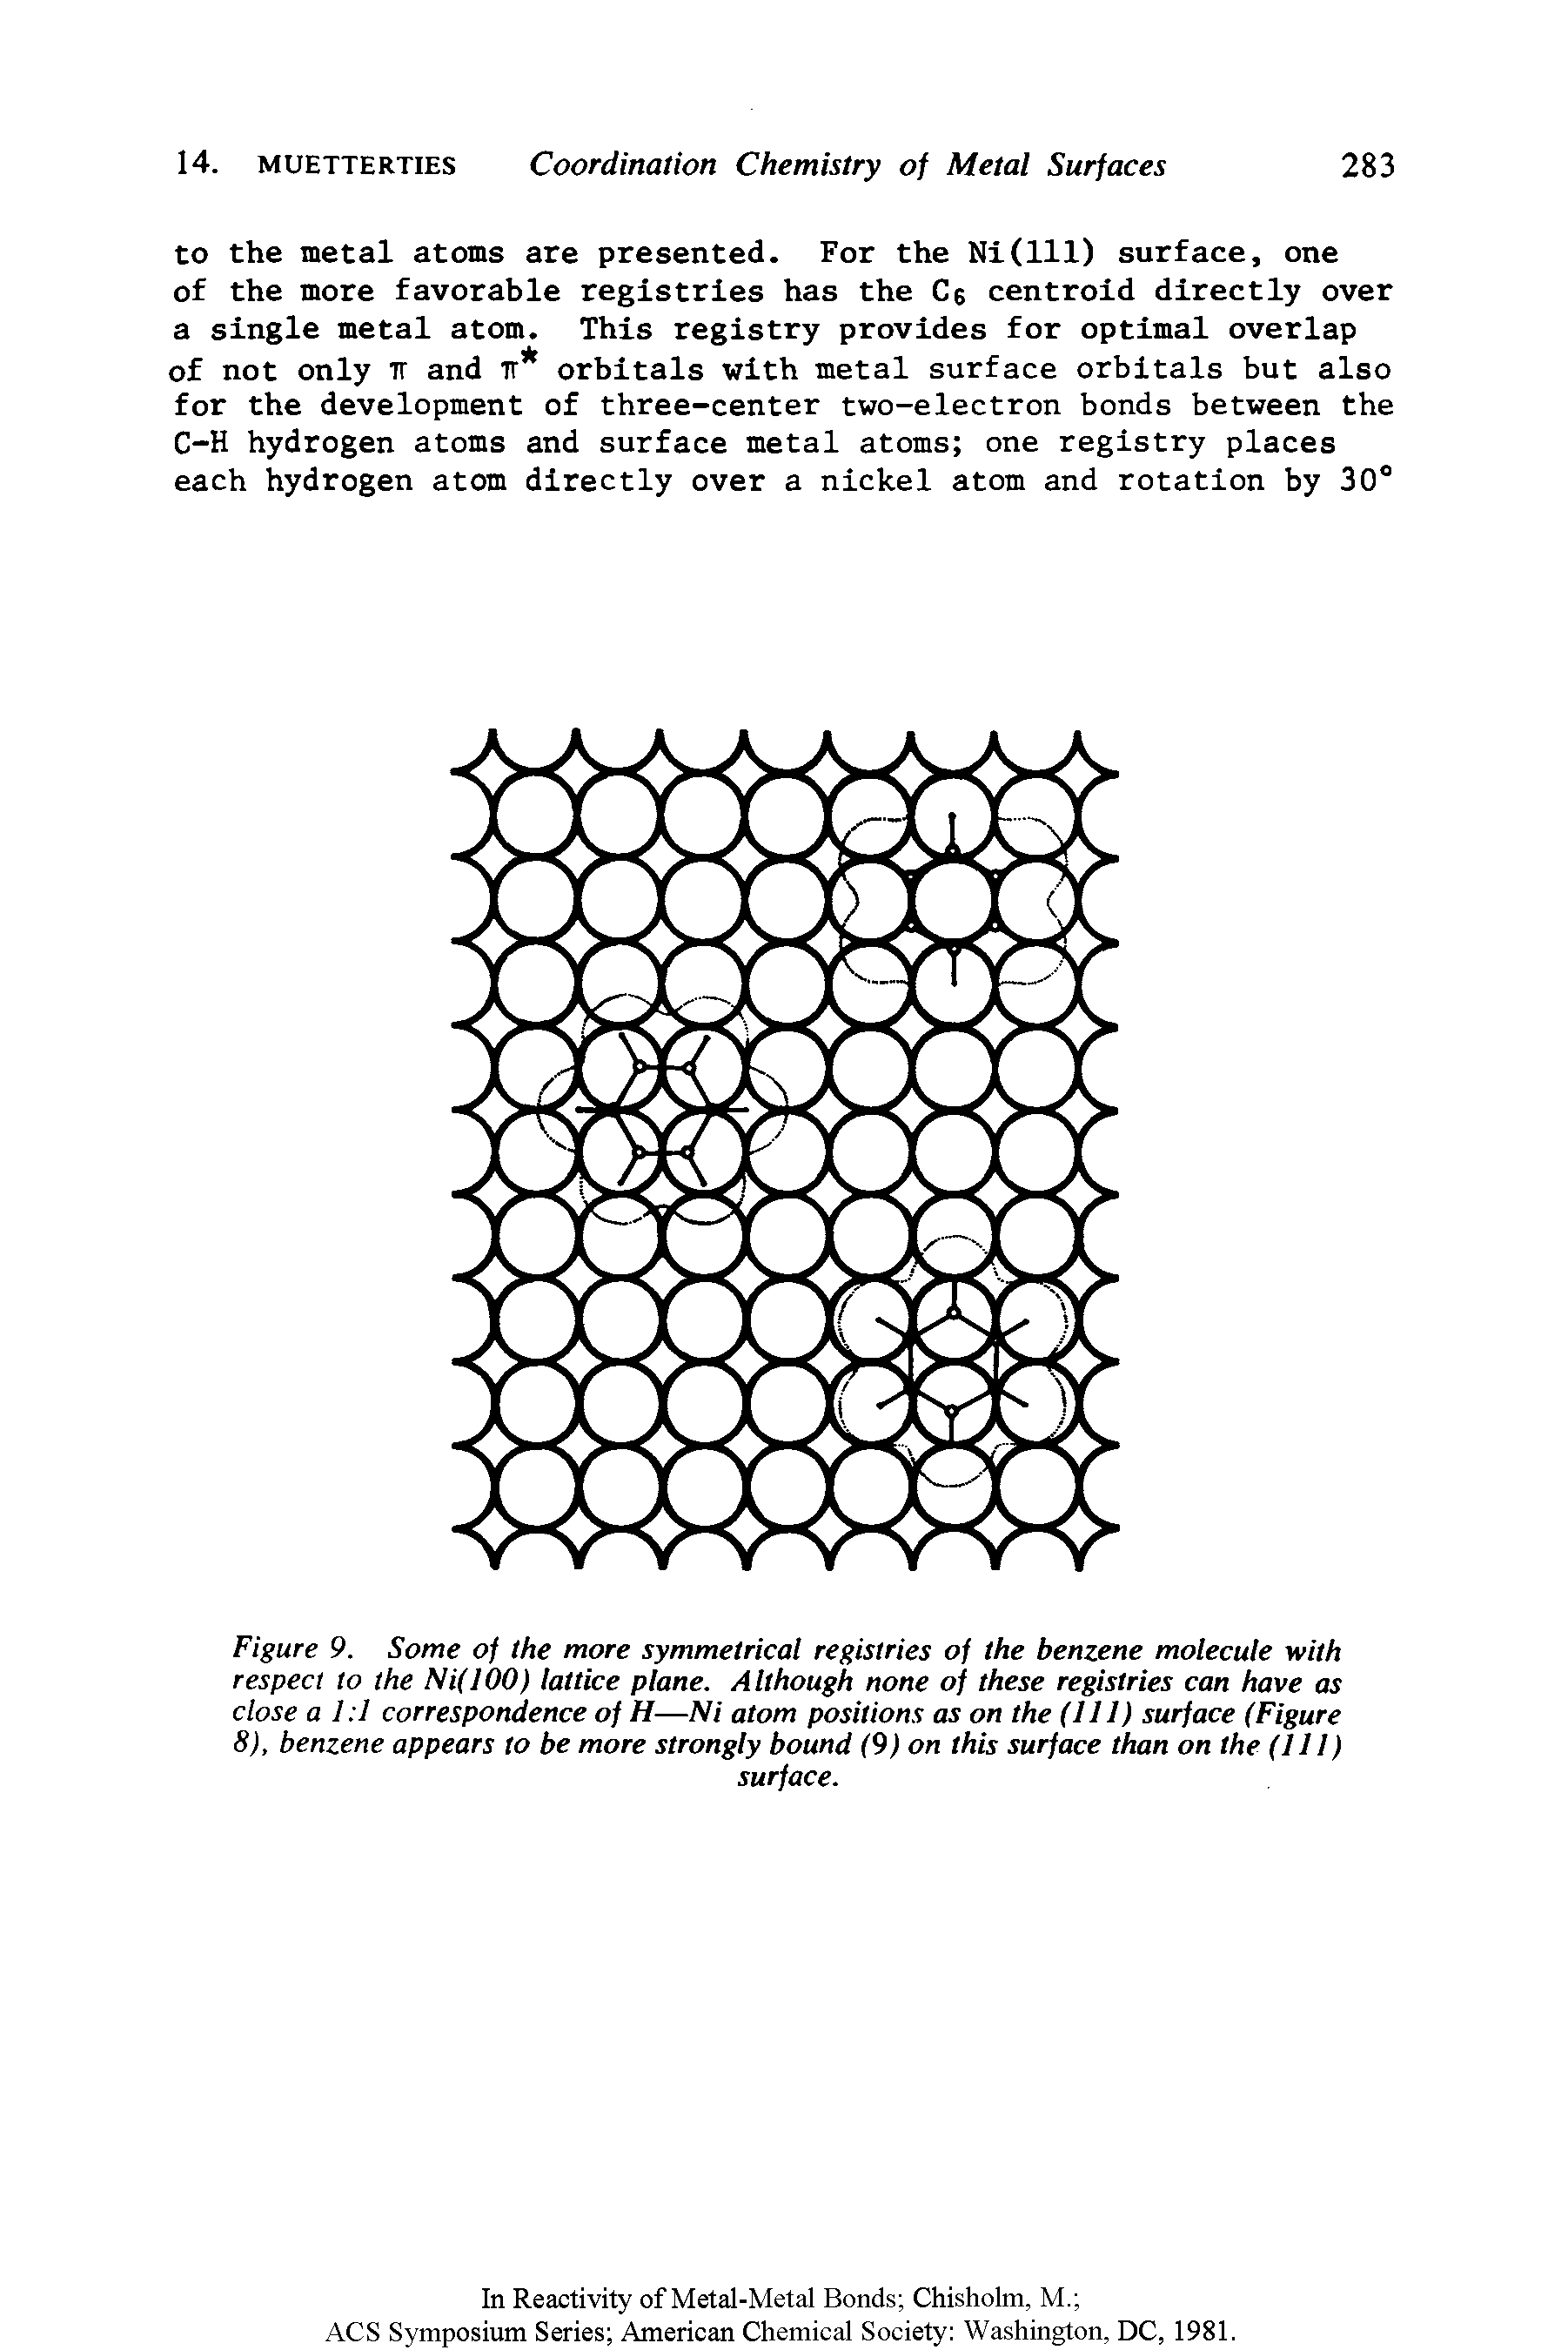 Figure 9. Some of the more symmetrical registries of the benzene molecule with respect to the Ni(100) lattice plane. Although none of these registries can have as close a 1 1 correspondence of H—Ni atom positions as on the (111) surface (Figure 8), benzene appears to be more strongly bound (9) on this surface than on the (111)...